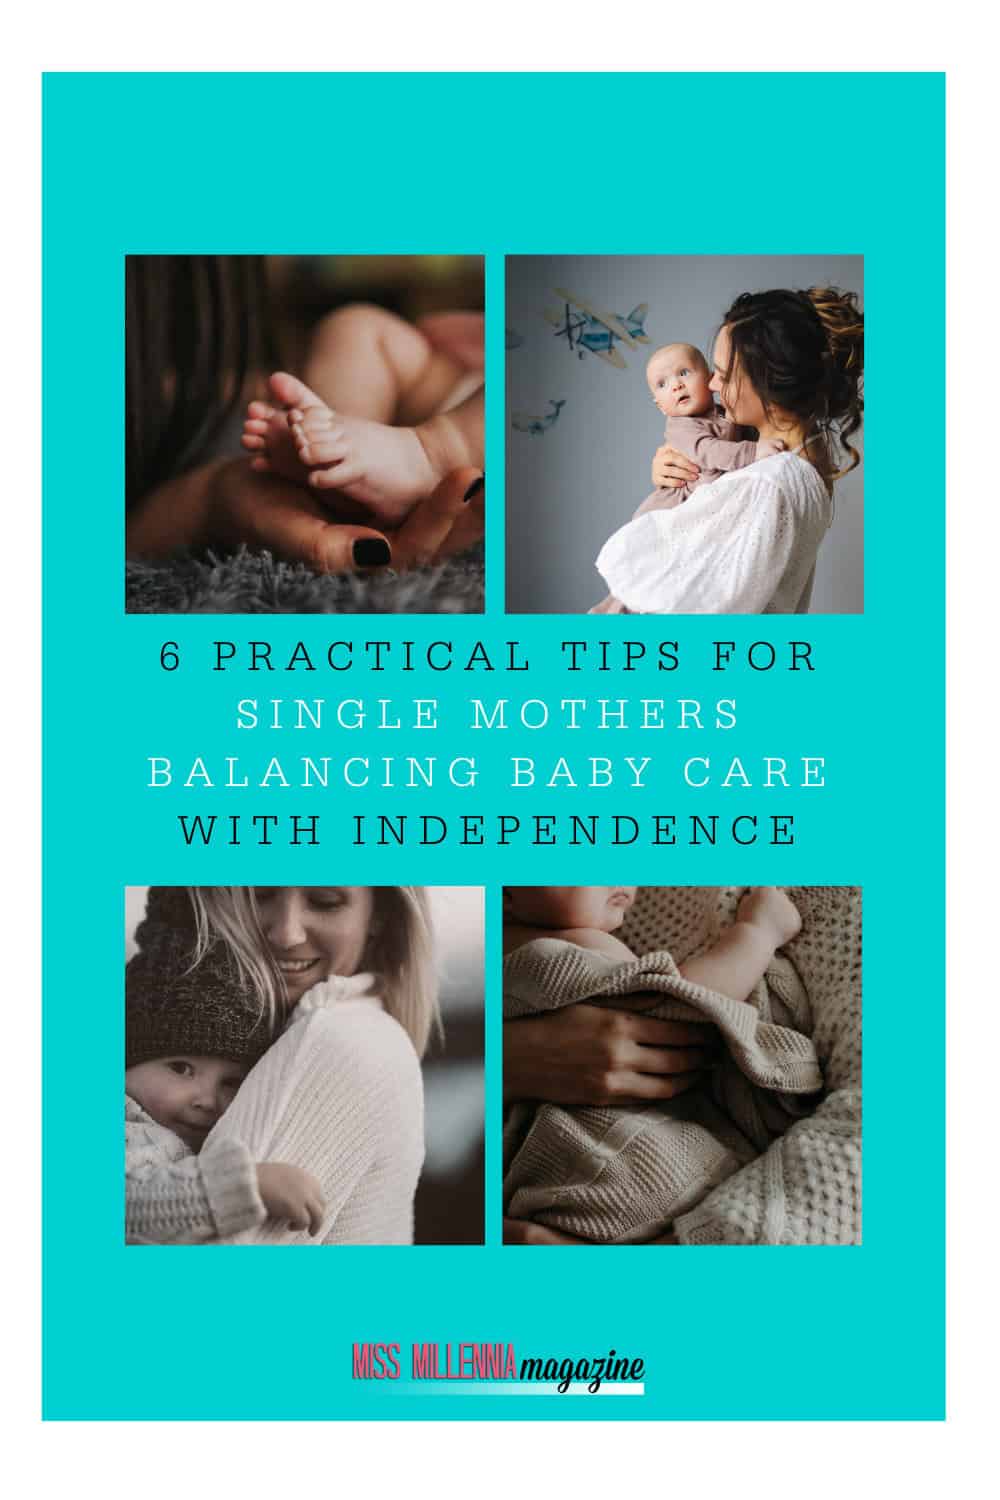 6 Practical Tips for Single Mothers Balancing Baby Care with Independence